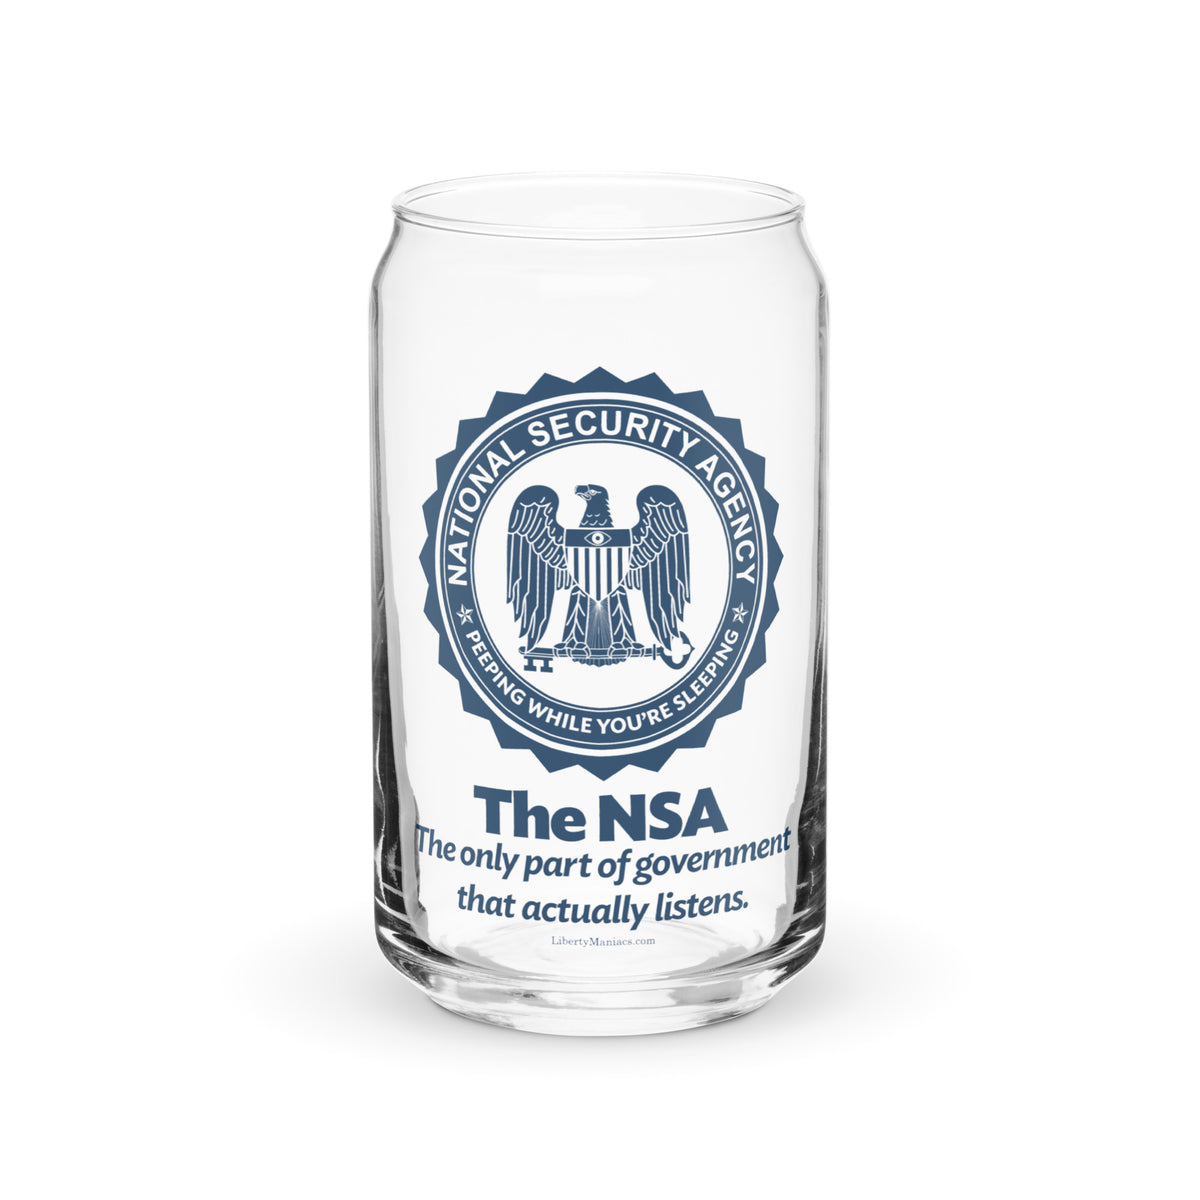 The NSA Can-Shaped glass